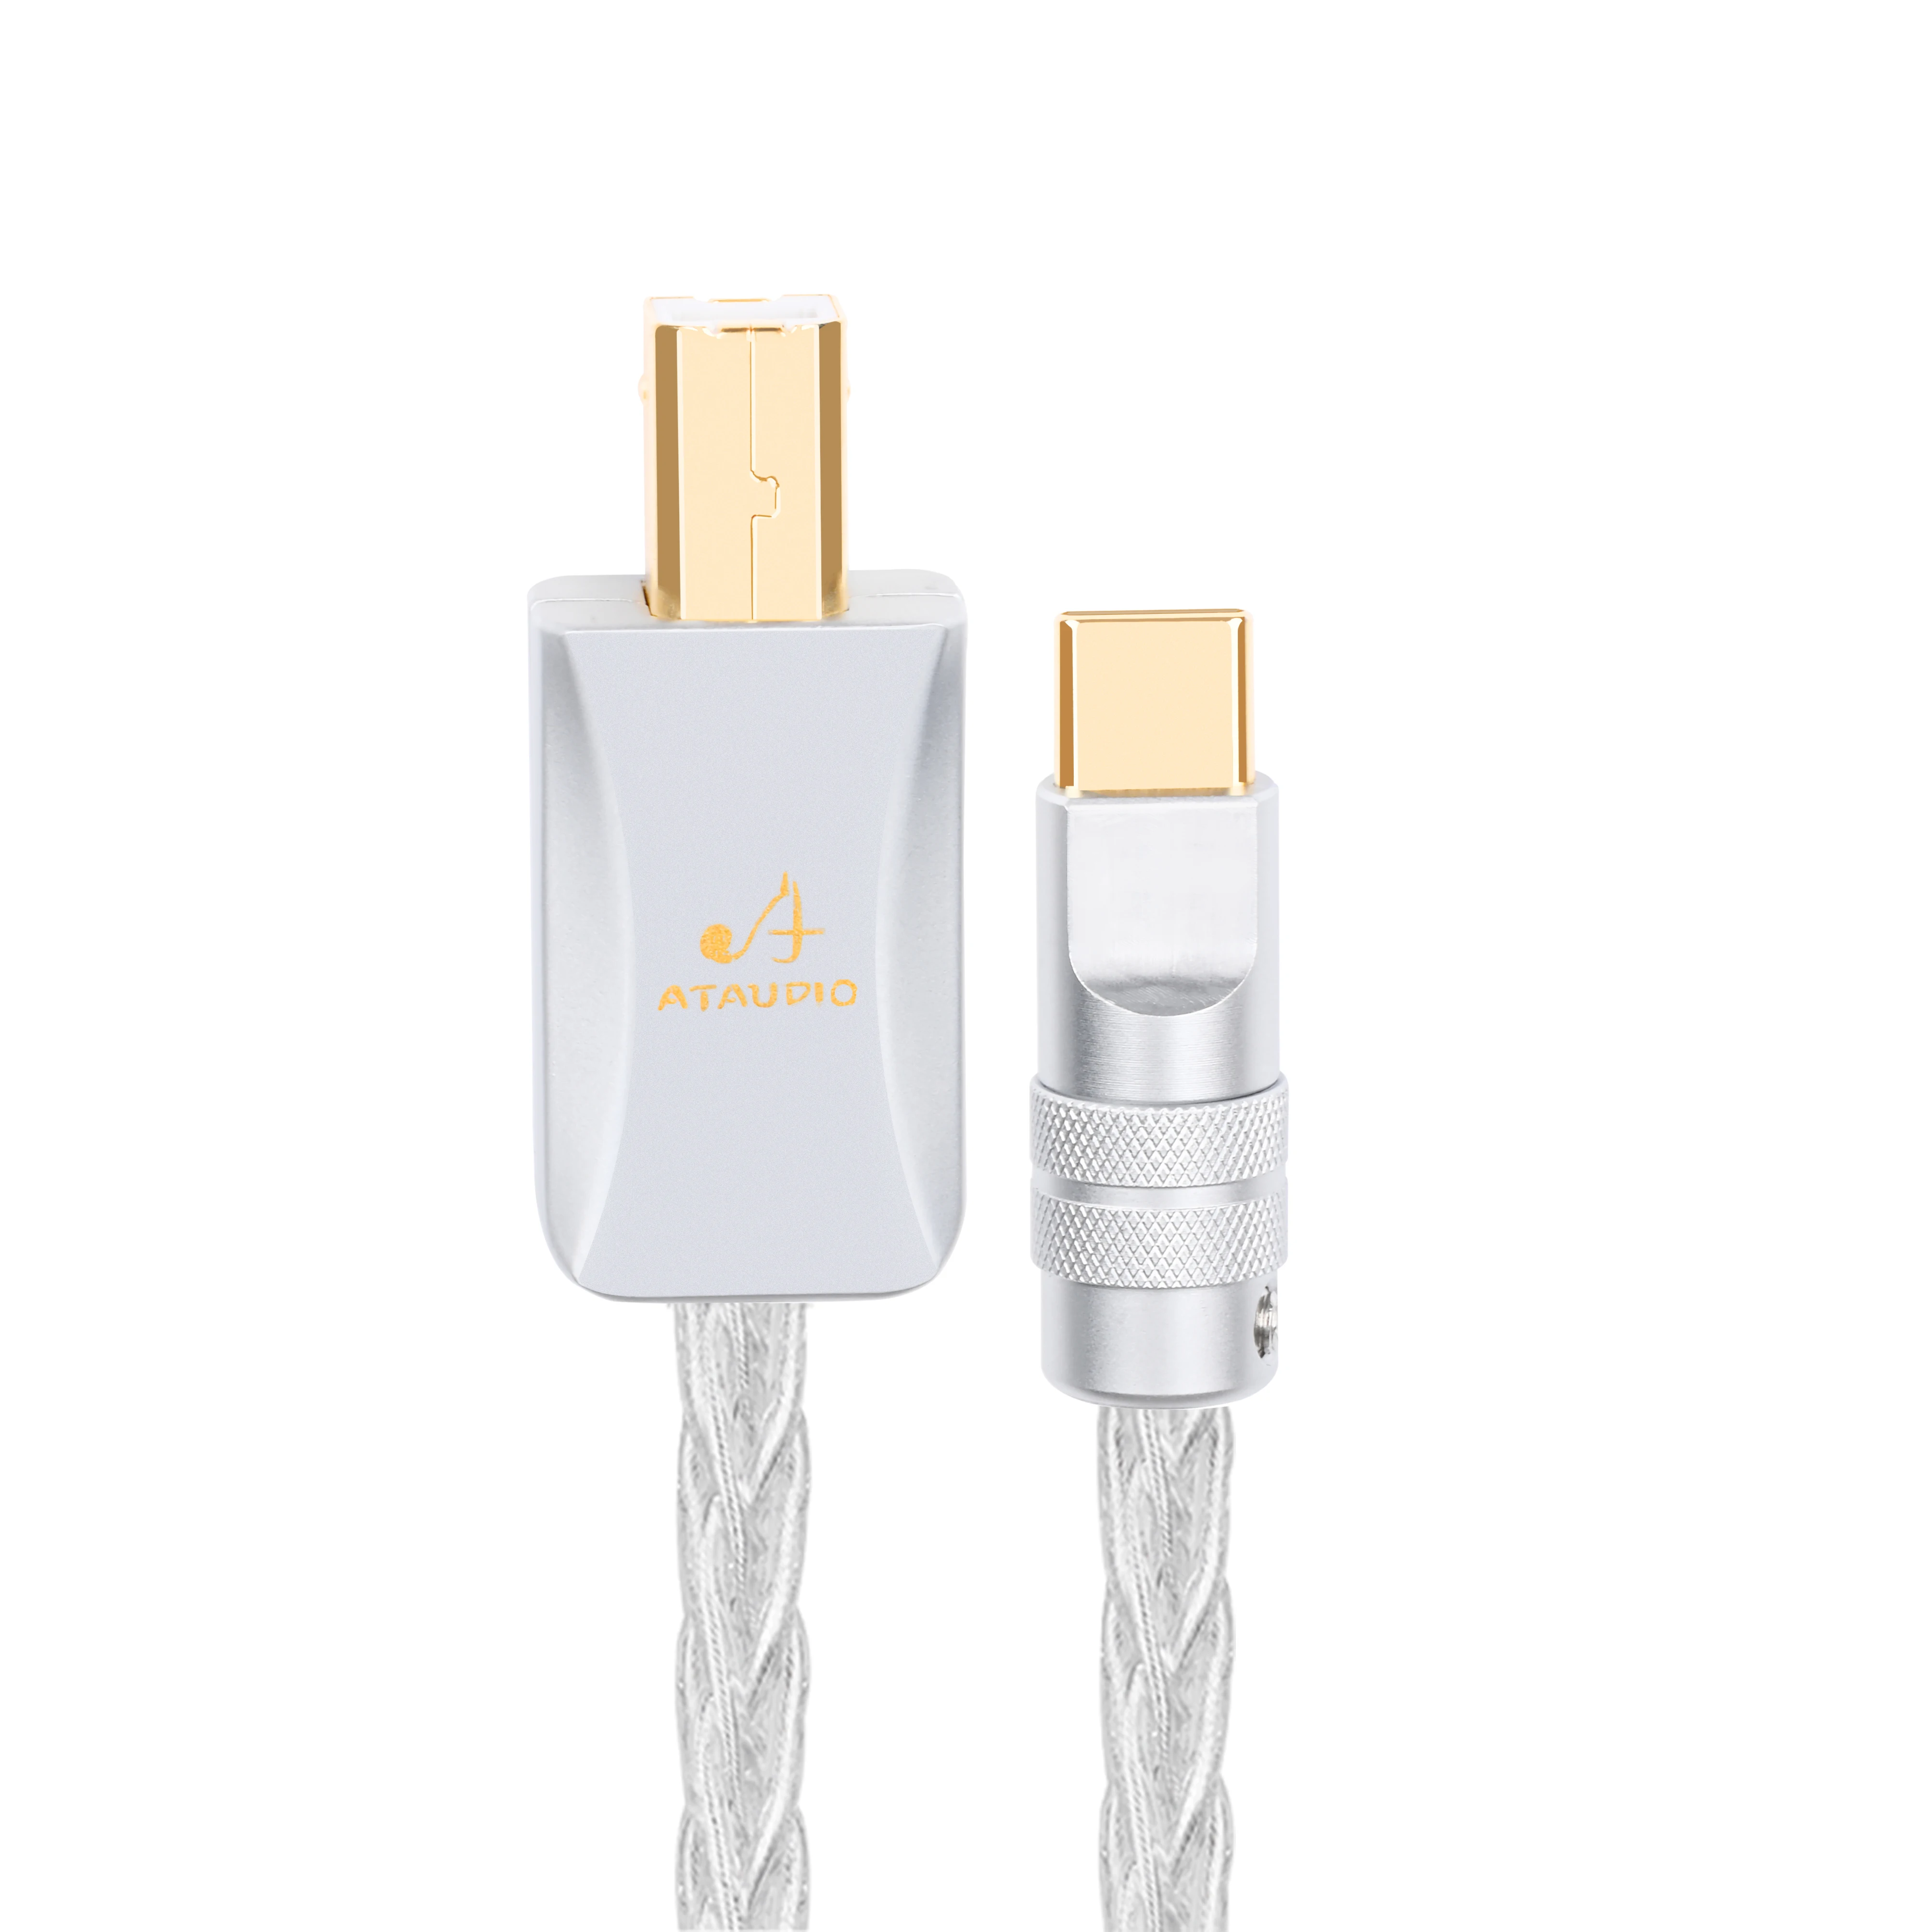 Hifi Pure Silver Usb Cable High Performance Type C to Type B Otg Data Audio Cable For Mobilephone and DAC